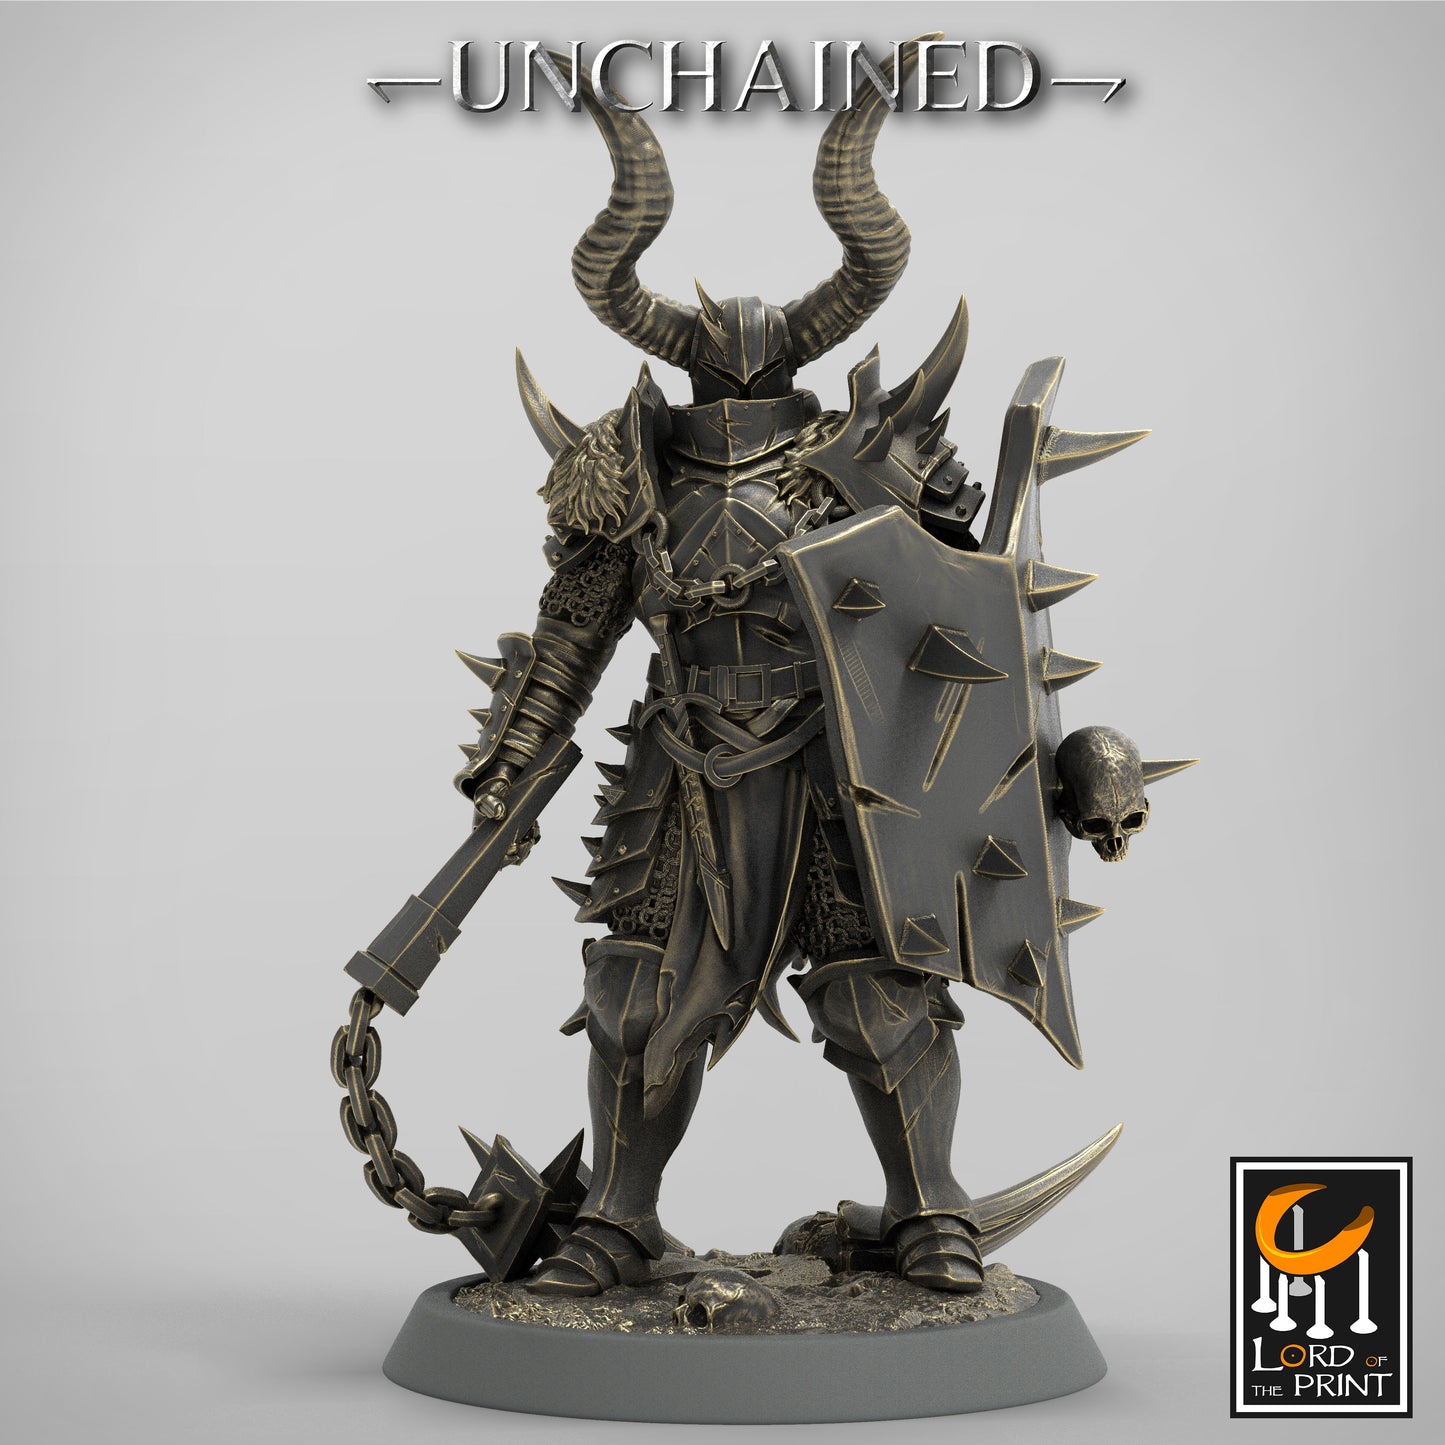 Light Soldiers - Flail Chief - UNCHAINED ARMY